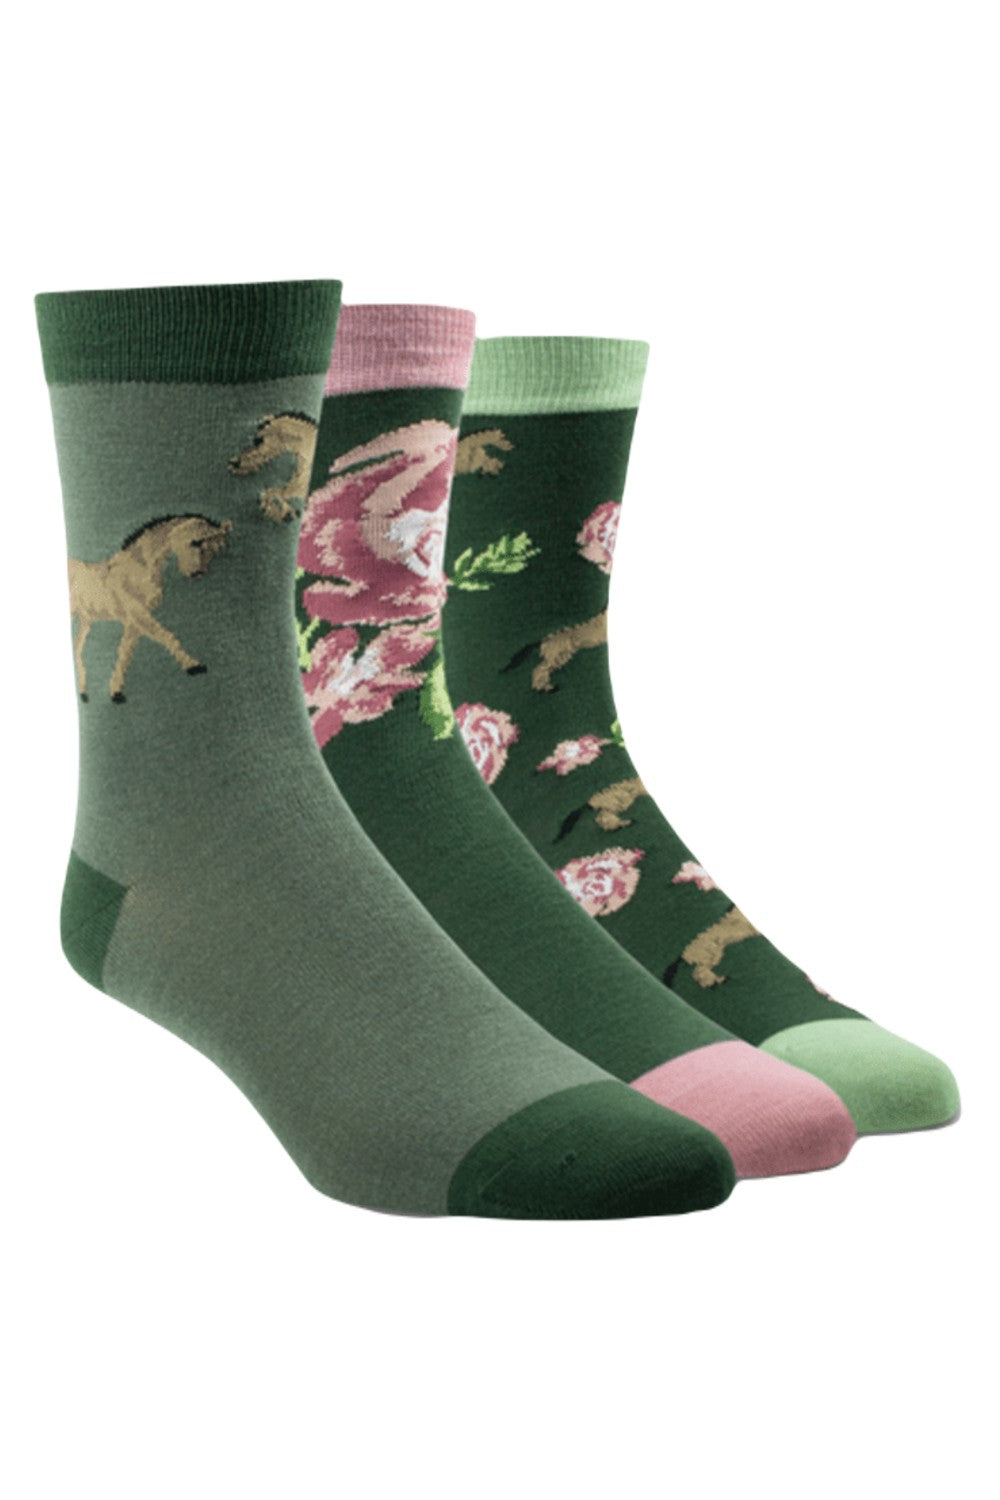 Ariat Womens Charm Crew Socks In Floral Horse 